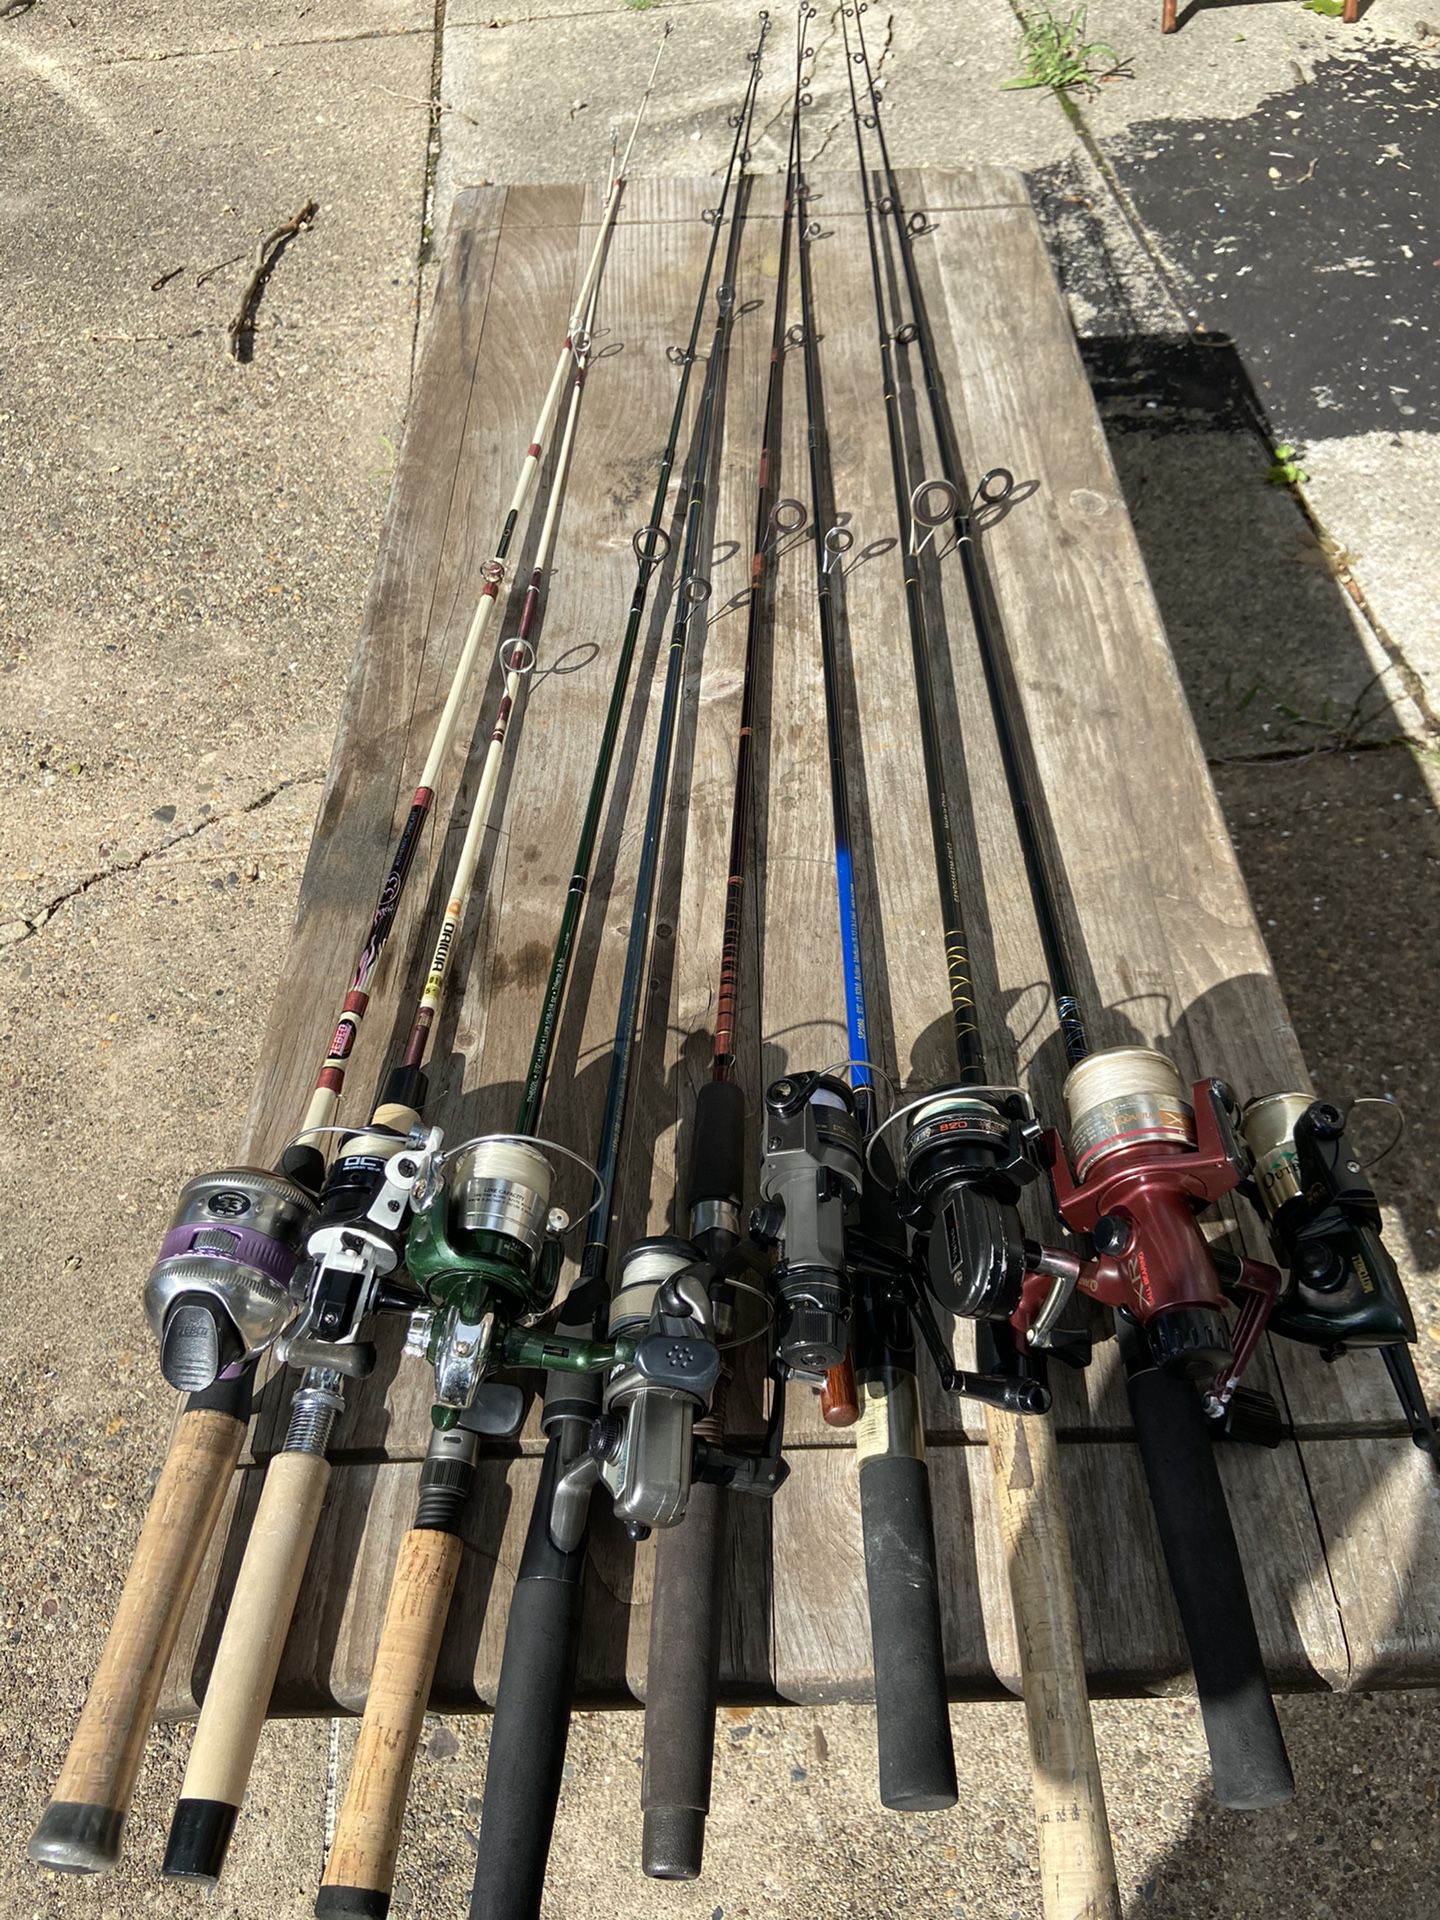 Various types of fresh water fishing rods, reels and lines combos. $35 each.